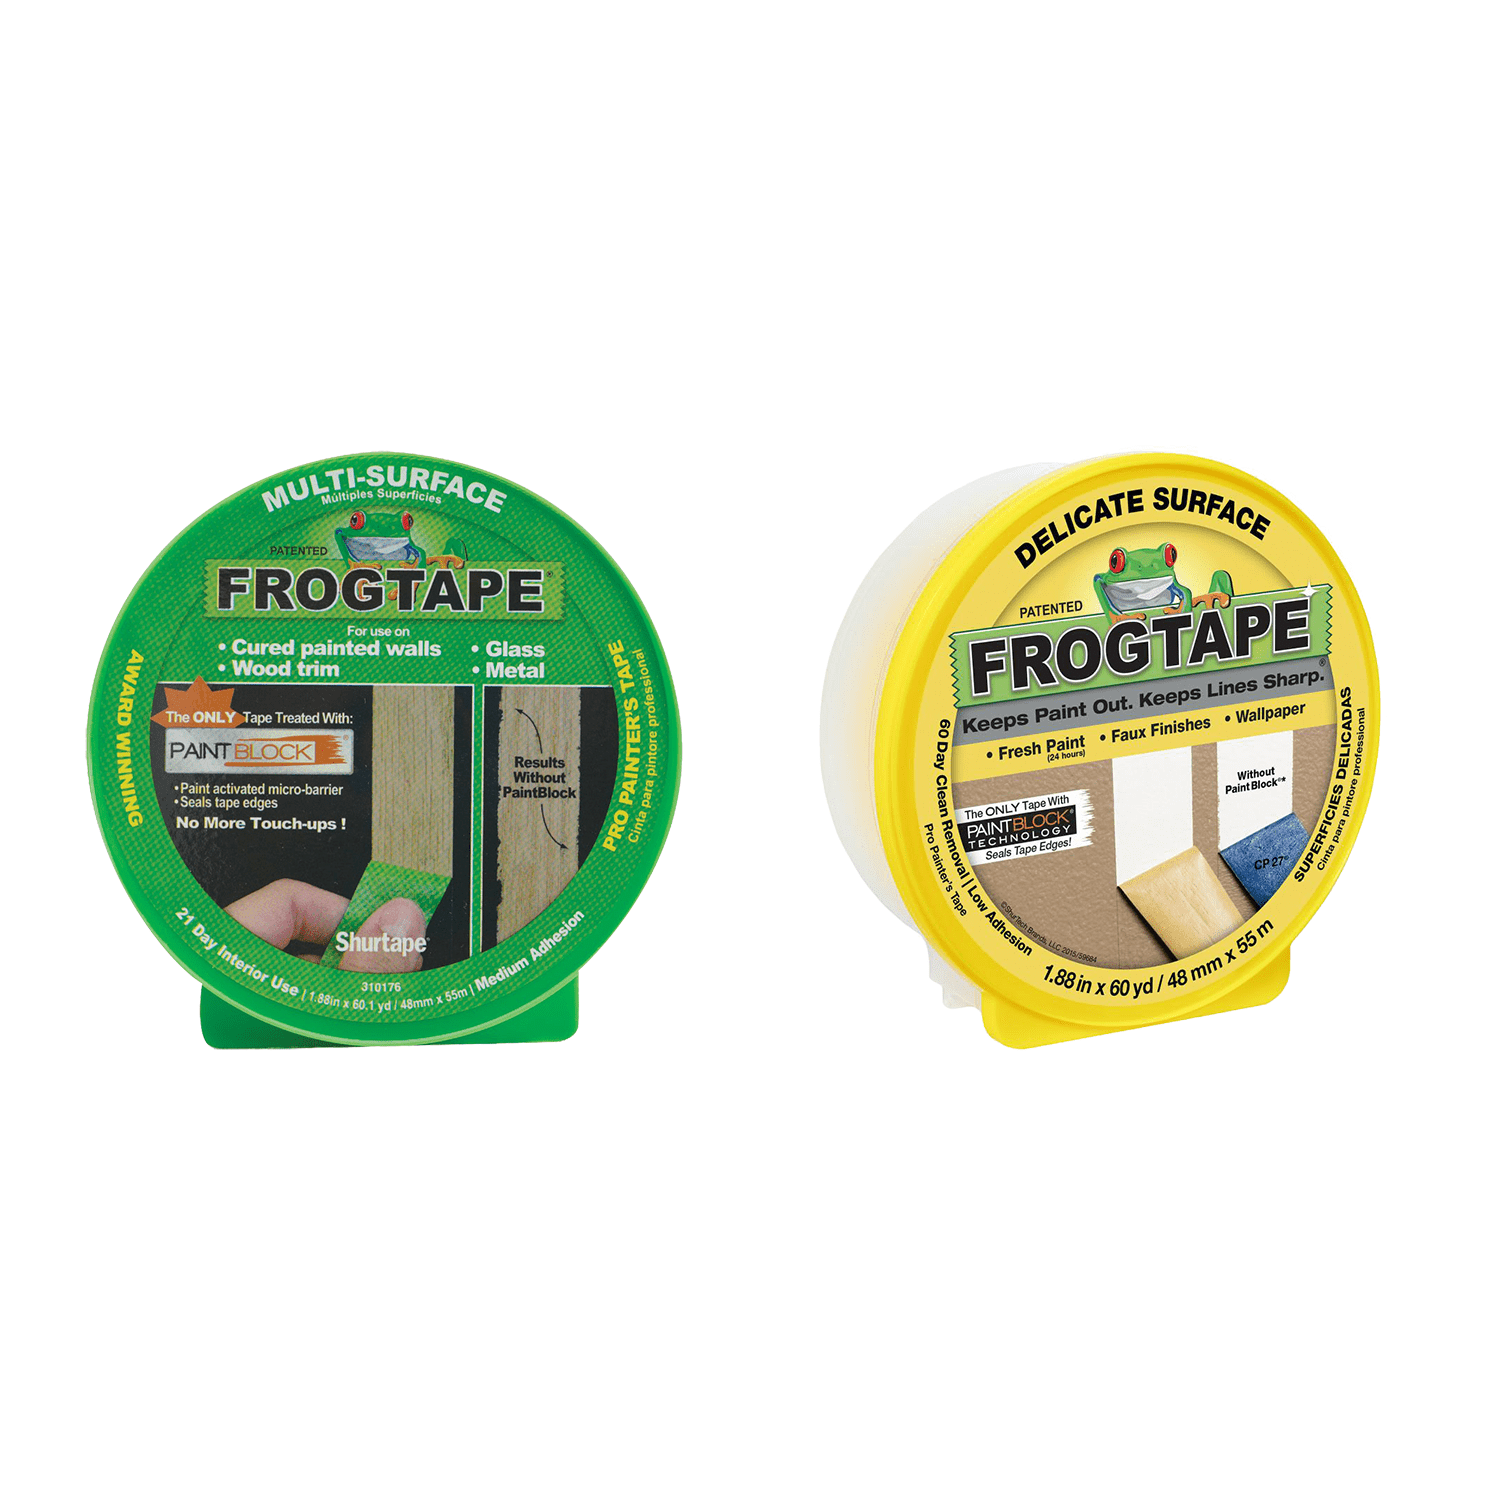 FrogTape Multi-Surface 1.88-in x 60 Yard(s) Painters Tape in the